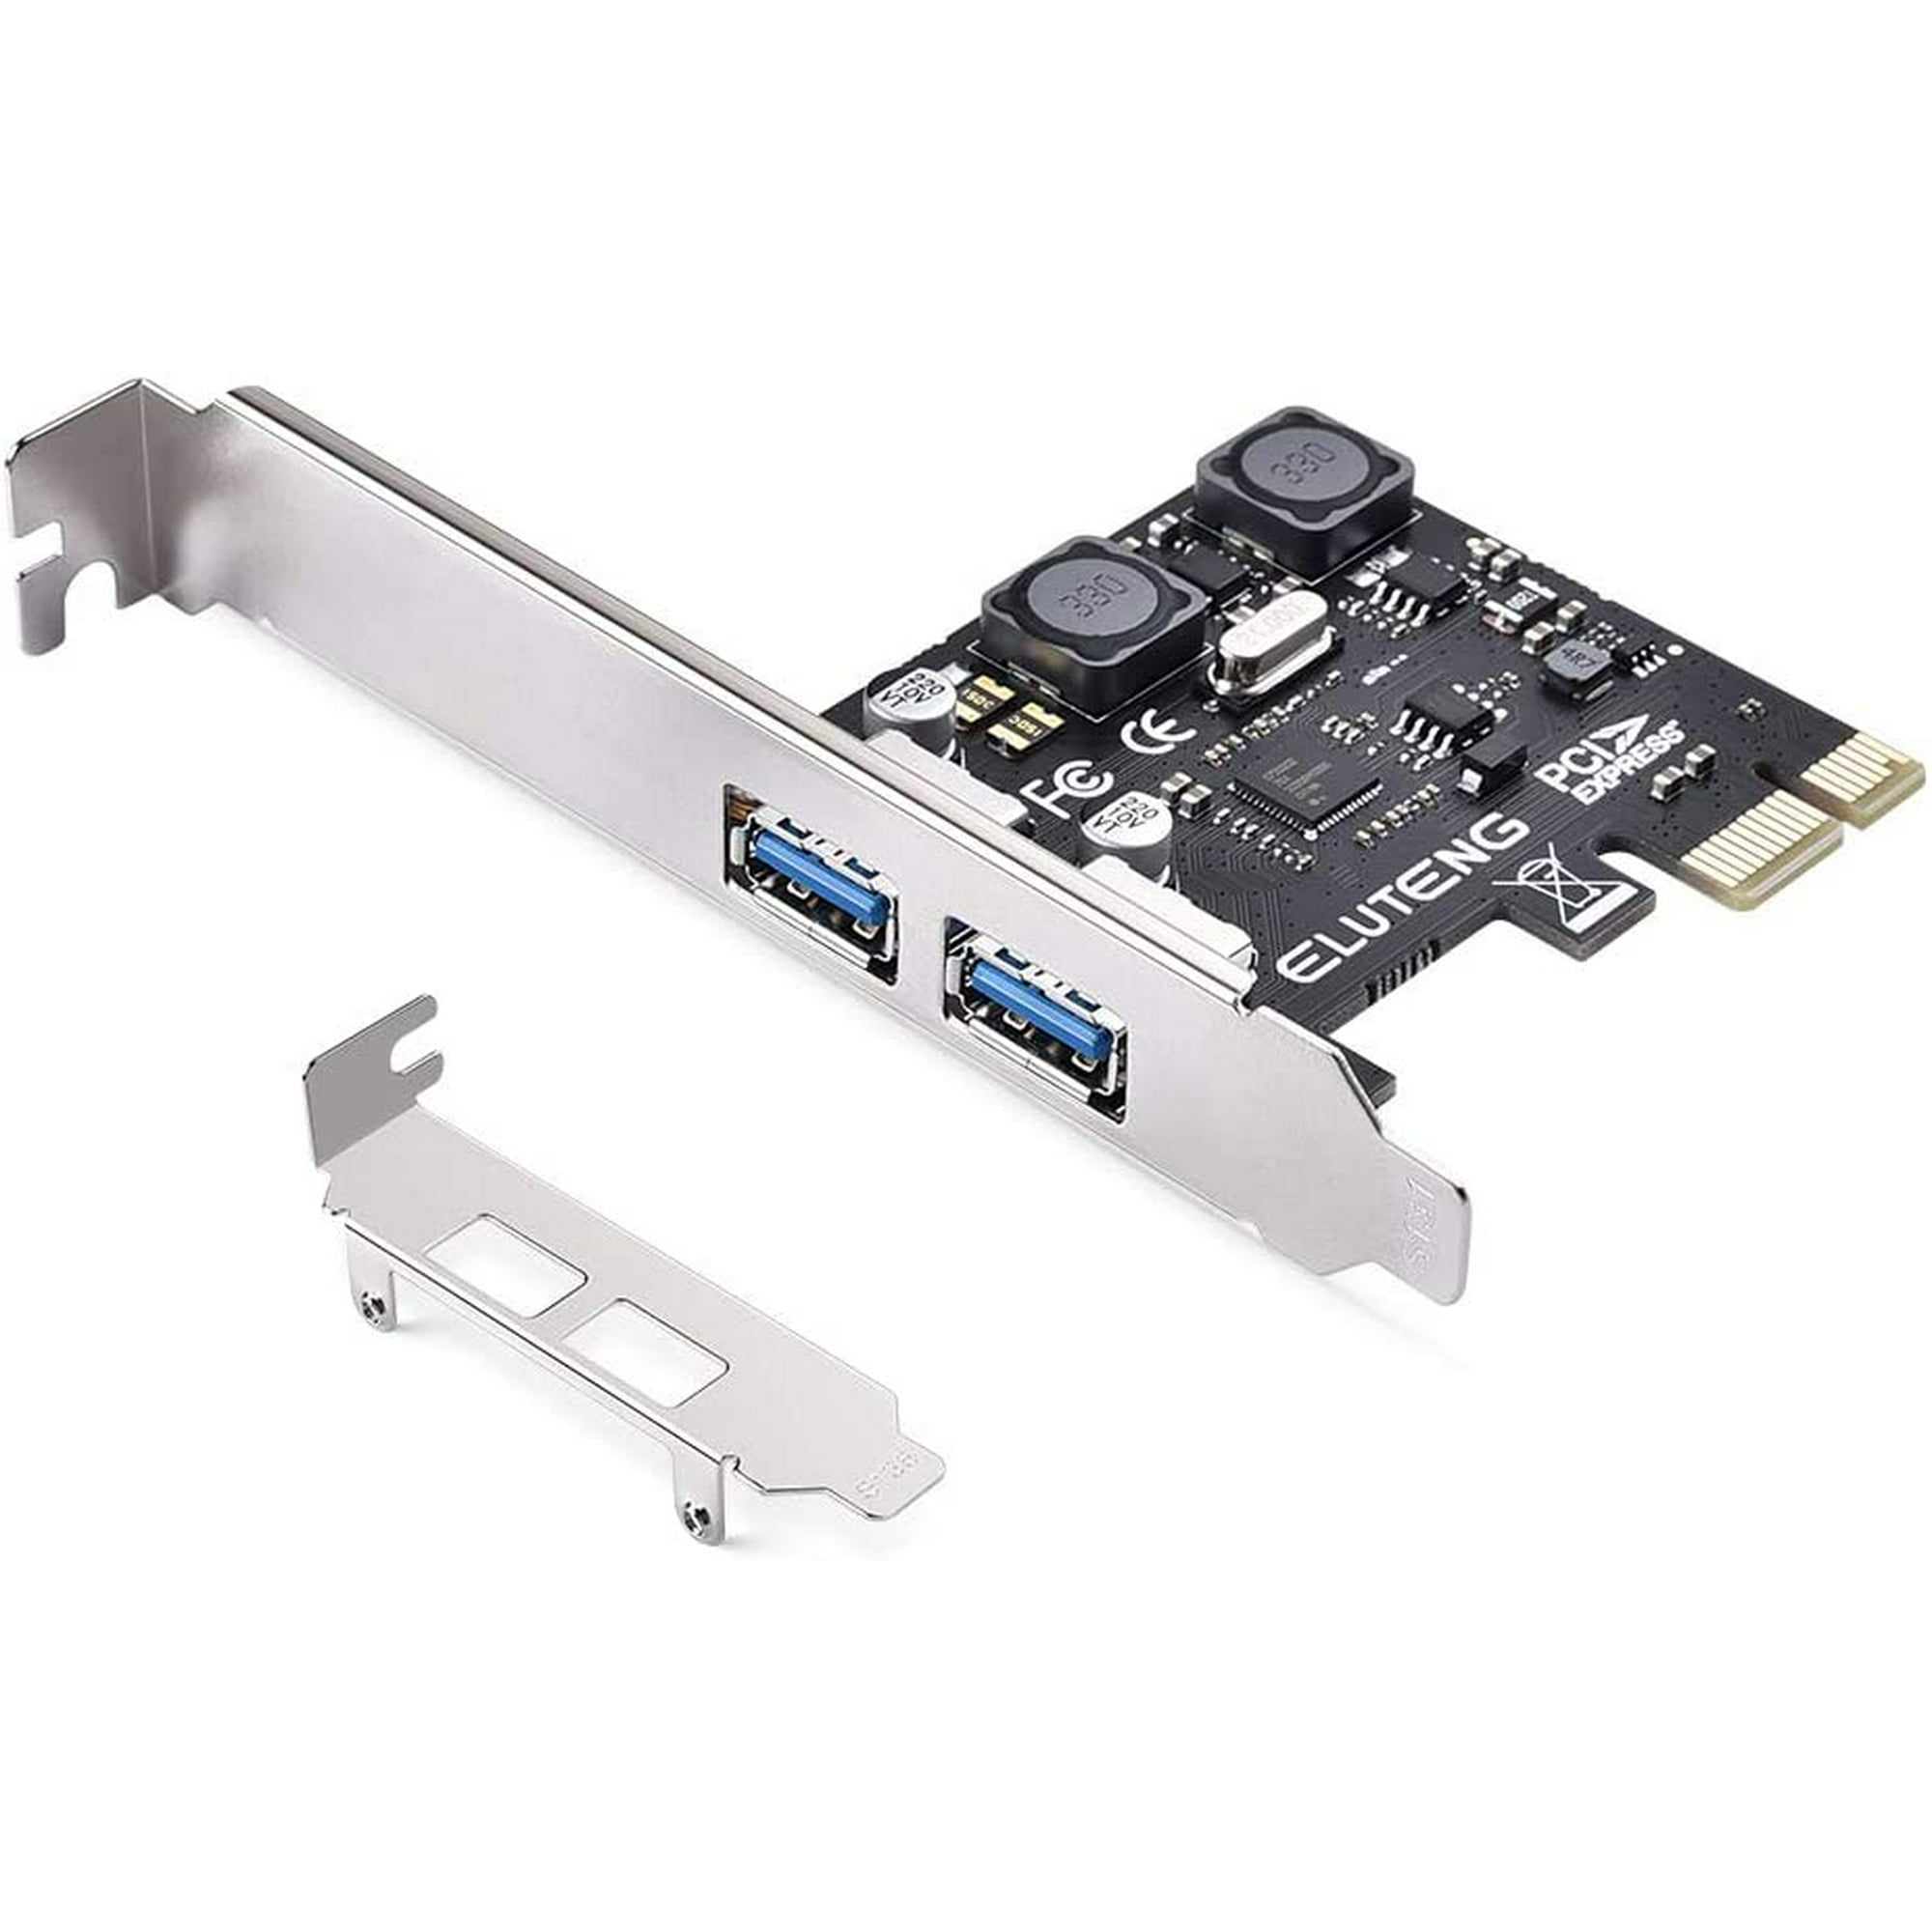 PCIE USB 3.0 Card, ELUTENG 2 Ports PCI Expree to USB Expansion Card Super Speed 5Gbps PCI-e Controller Adapter | Walmart